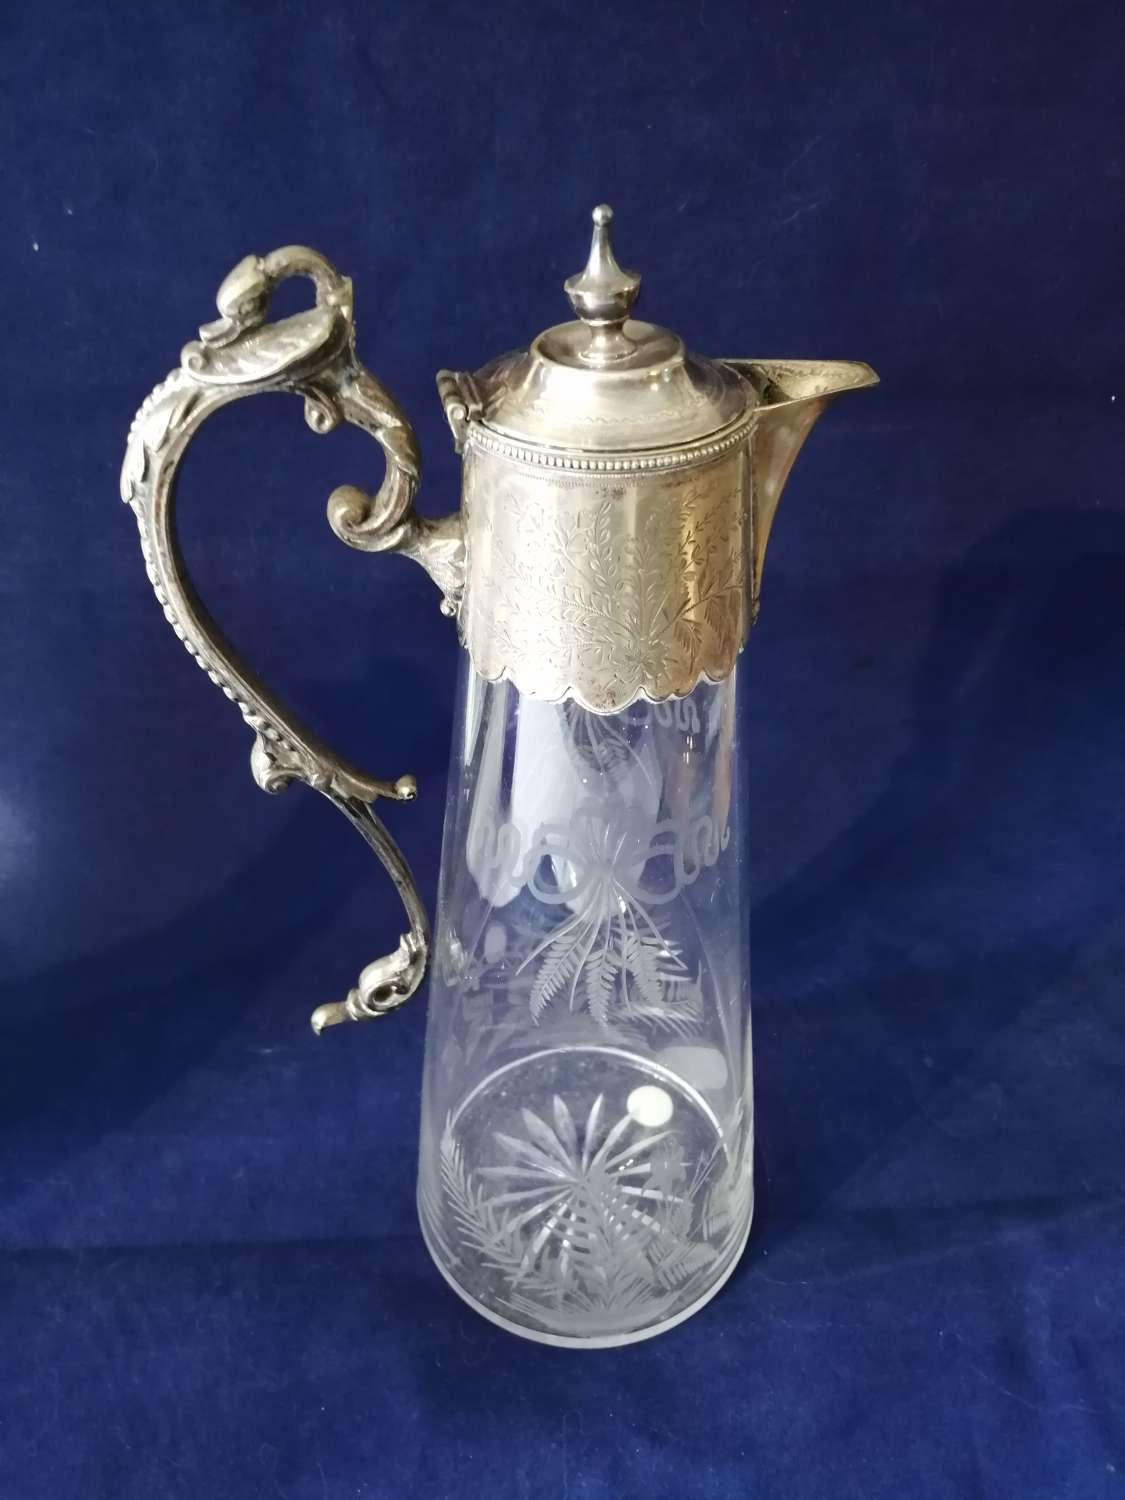 A fine quality 19th century engraved glass and silver plate claret jug